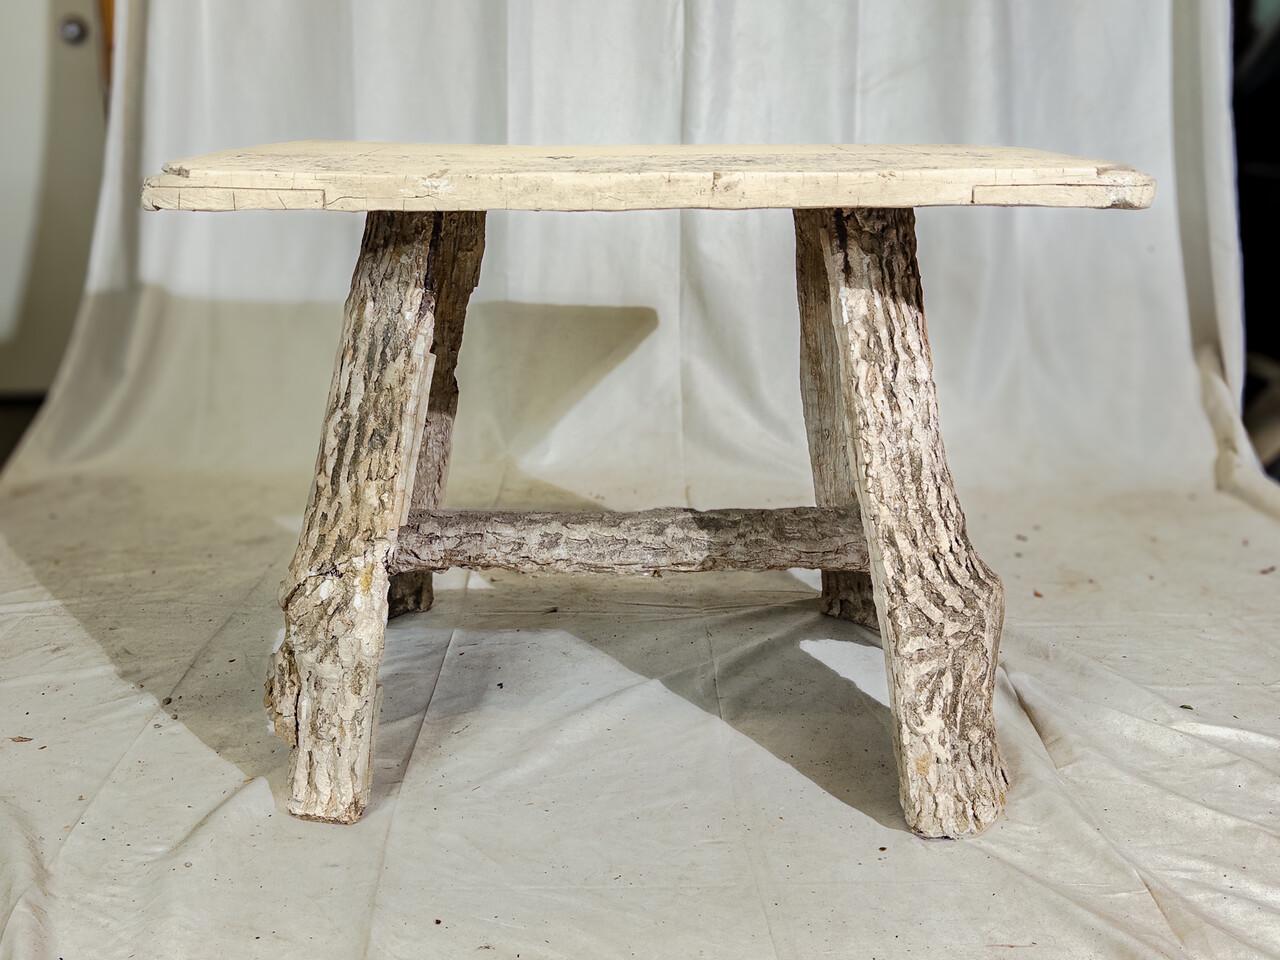 Transform your garden into a serene retreat with this charming Vintage Faux Bois Garden Table. Crafted with intricate detail, it portrays the timeless elegance of wood, yet boasts the durability of weather-resistant materials. Its Faux Bois design